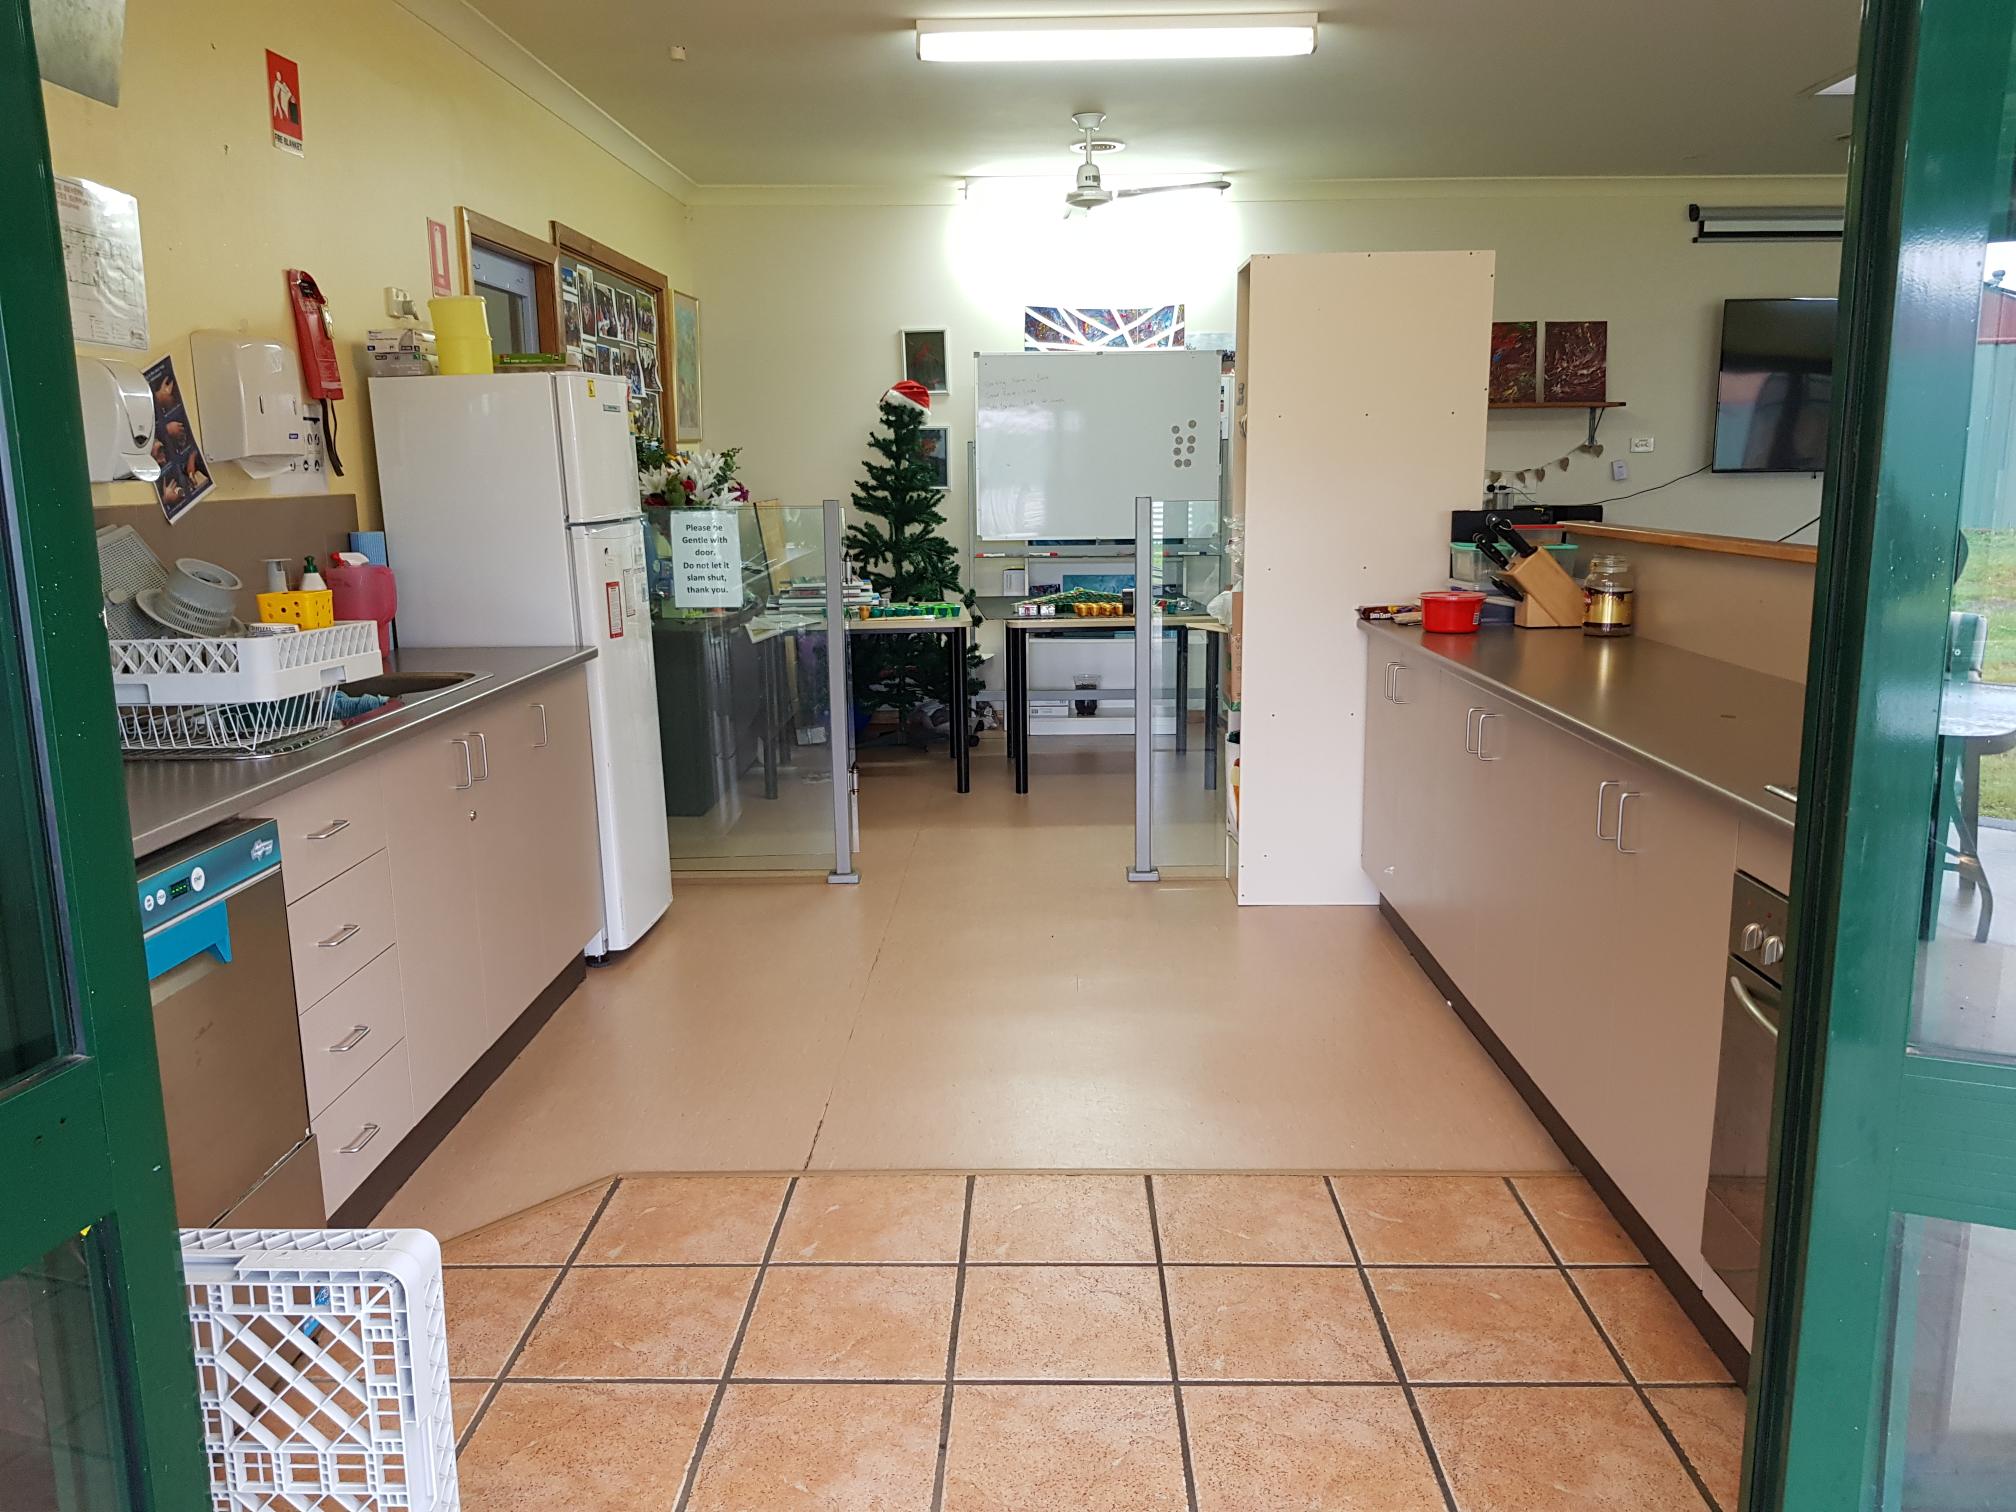 Life Choices - Support Services Activity Room One Kitchen